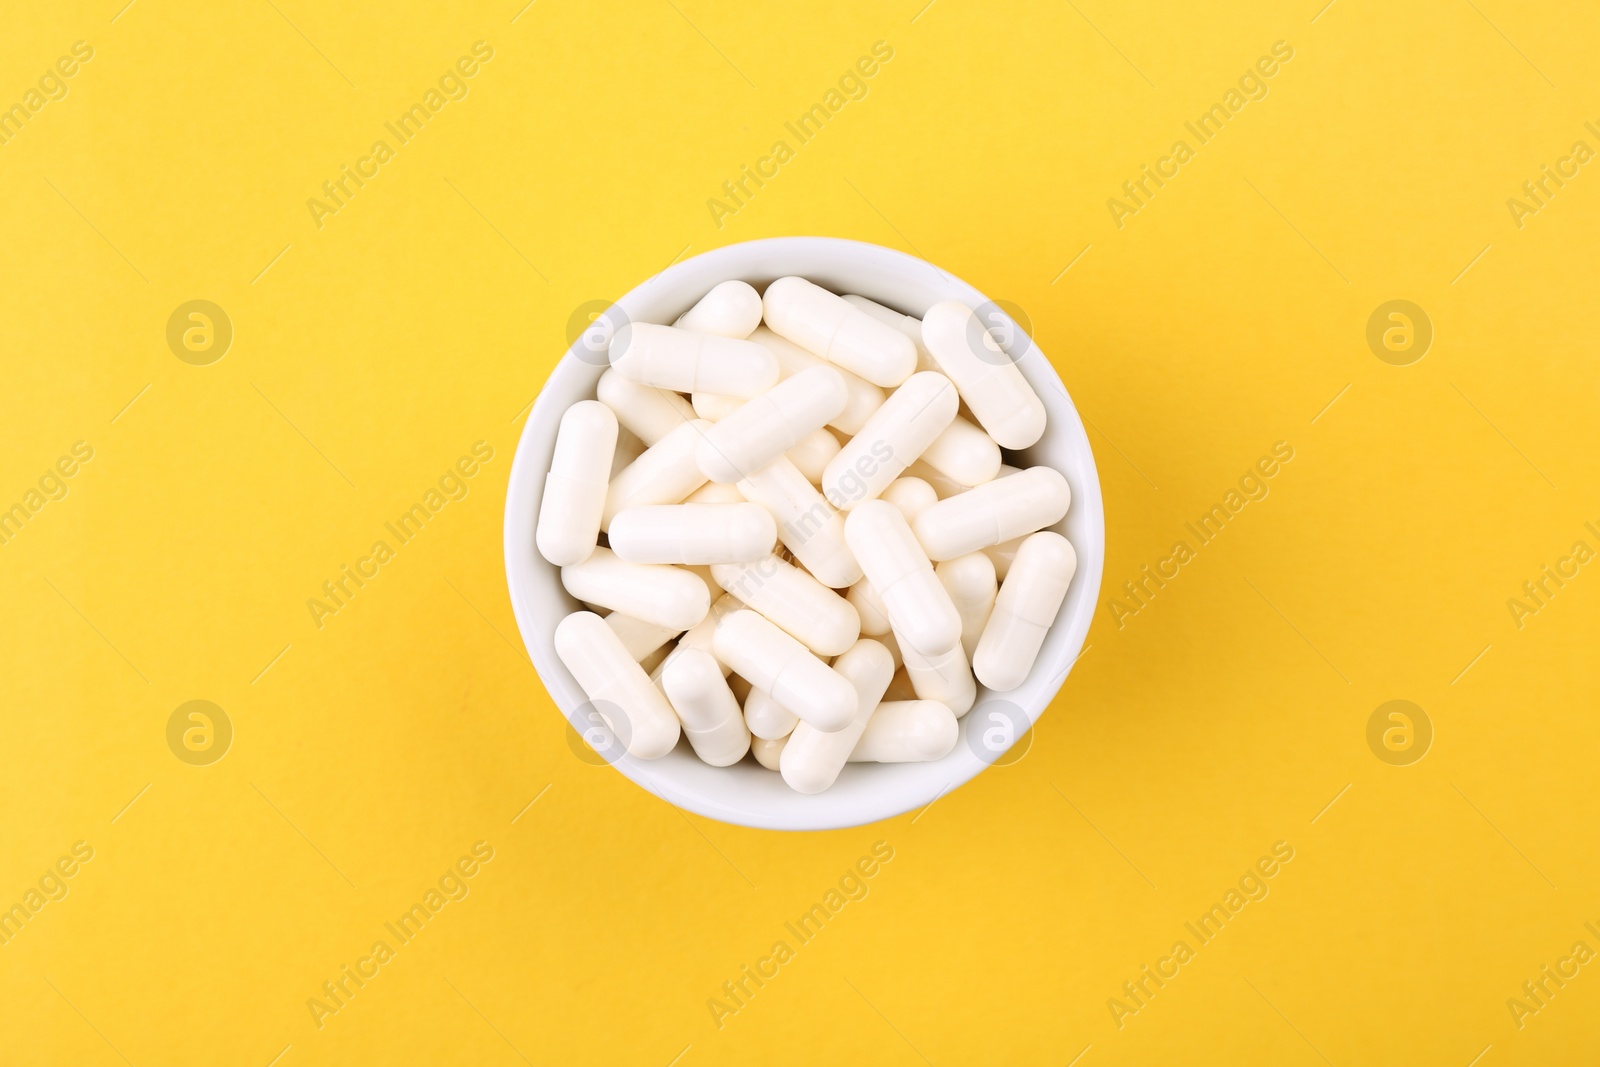 Photo of Vitamin capsules in bowl on orange background, top view